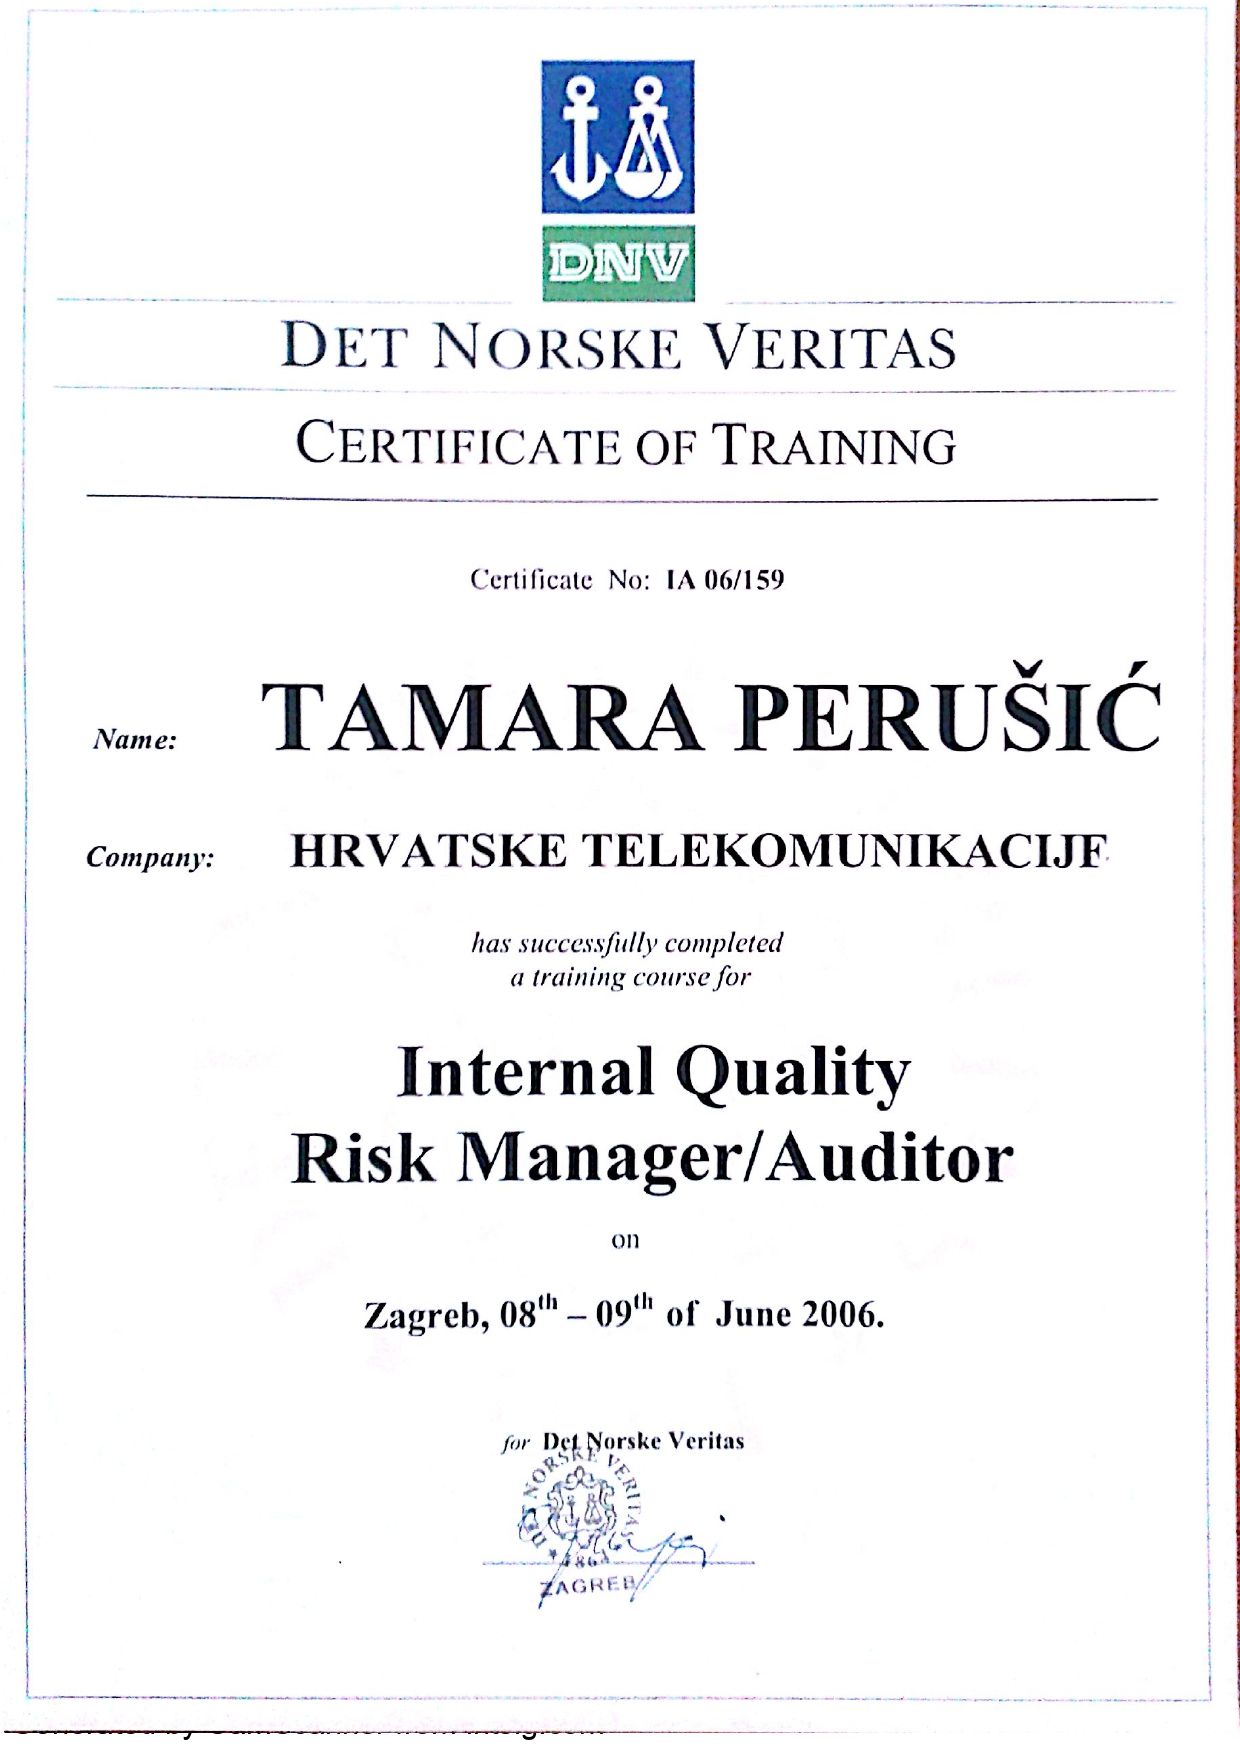 ISO 9001 Internal Quality Risk Manager Auditor